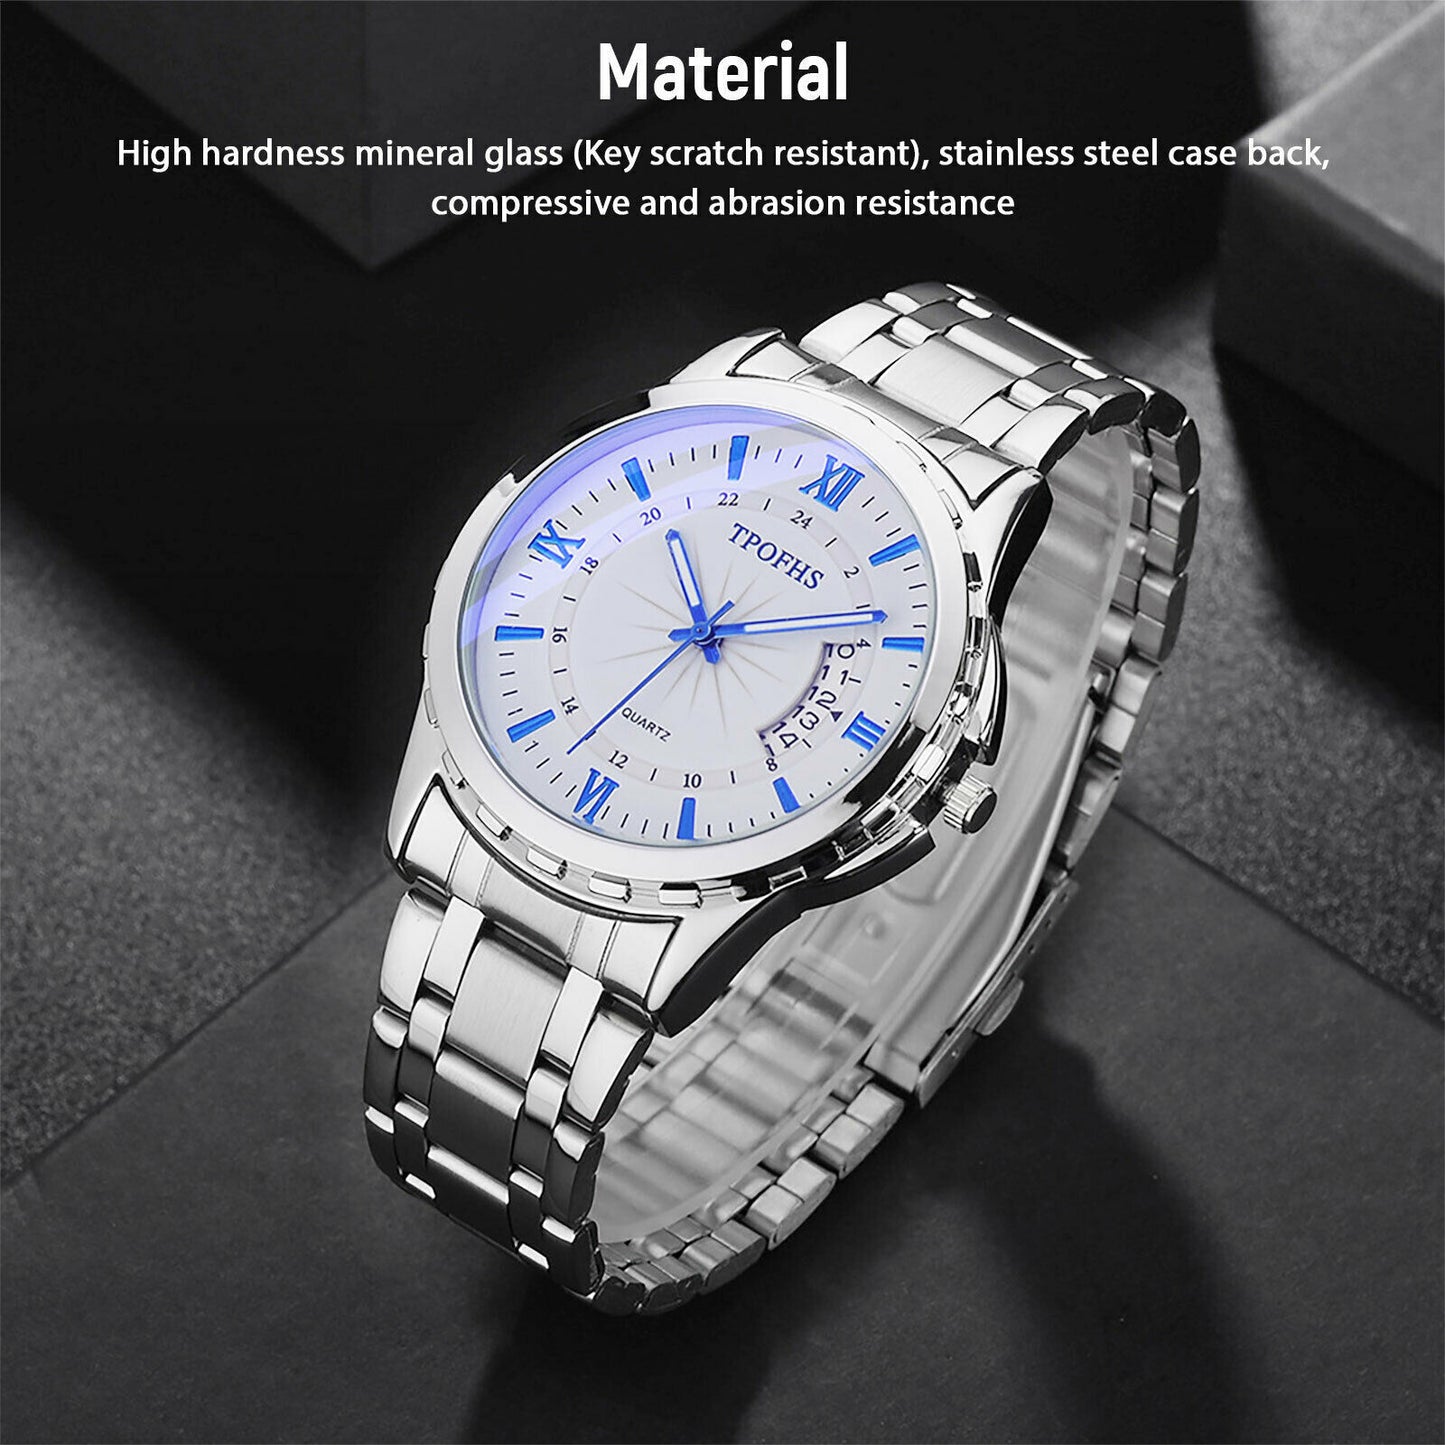 Stainless Steel Watch For MEN Classic Analog Wristwatch Fashion Classic Men Gift